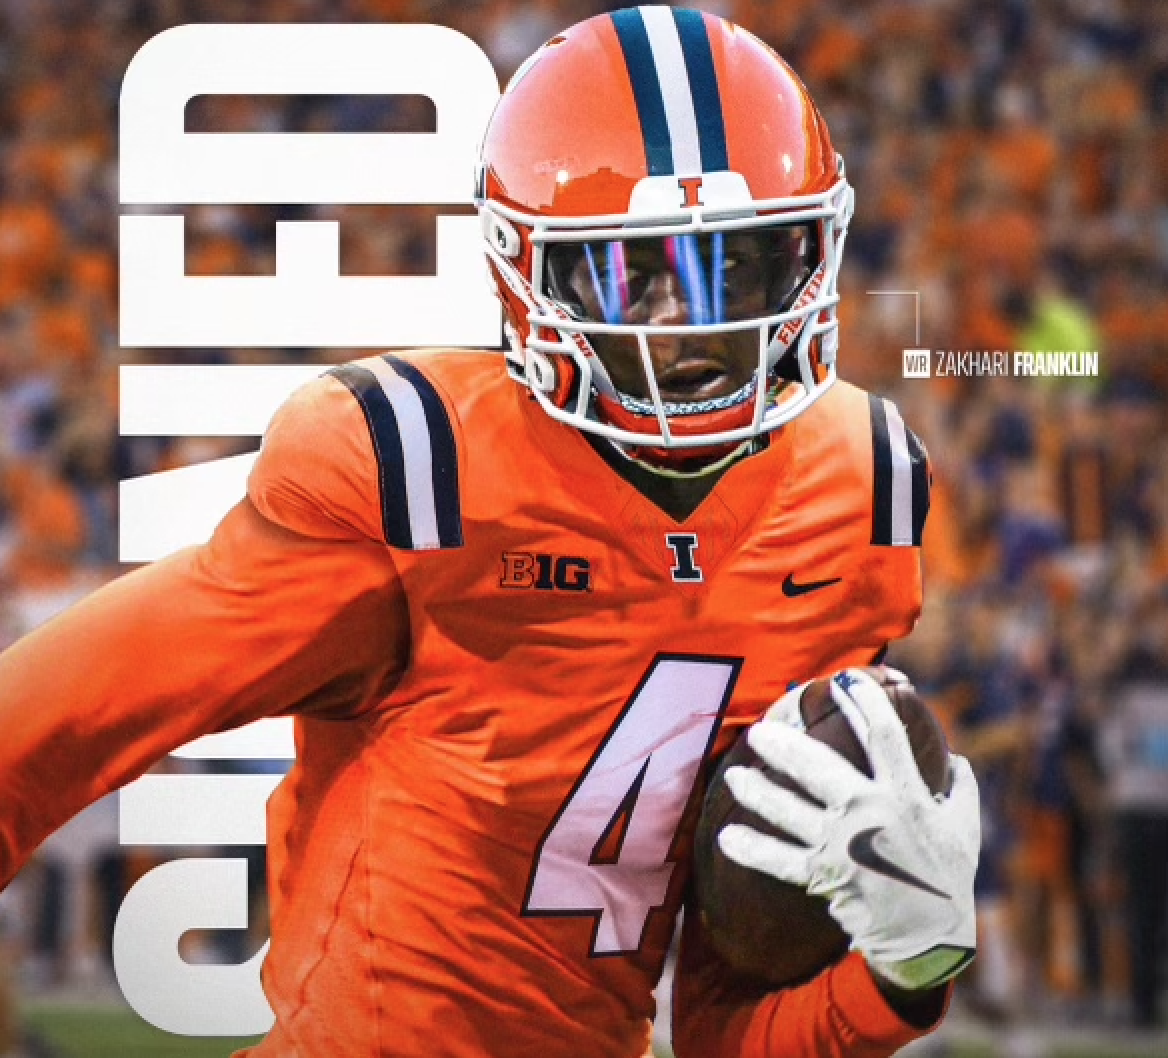 A+picture+of+Zakhari+Franklin+photoshopped+into+an+Illinois+jersey.+Franklin+will+join+the+Illini+this+fall+as+the+NCAAs+active+receiving+leader.